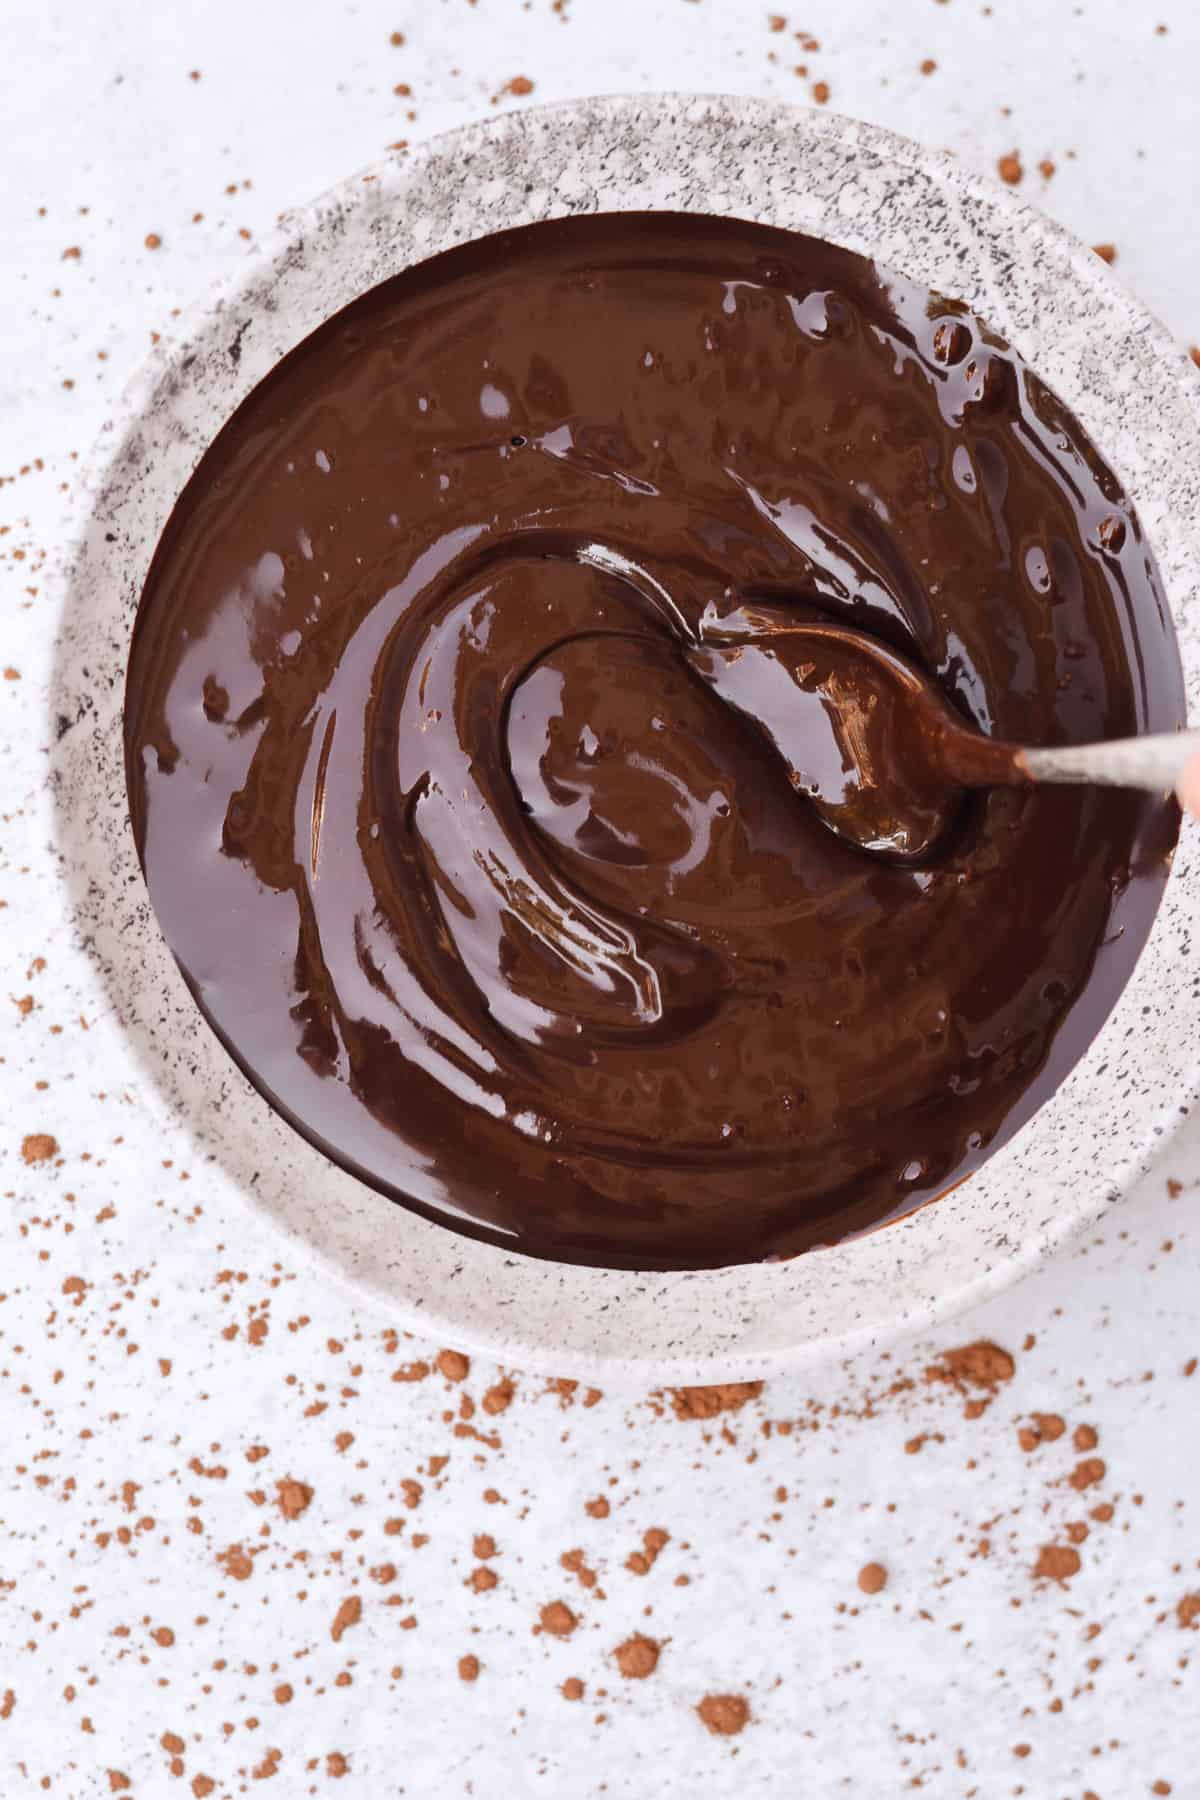 Spoon in a bowl of chocolate fudge sauce.